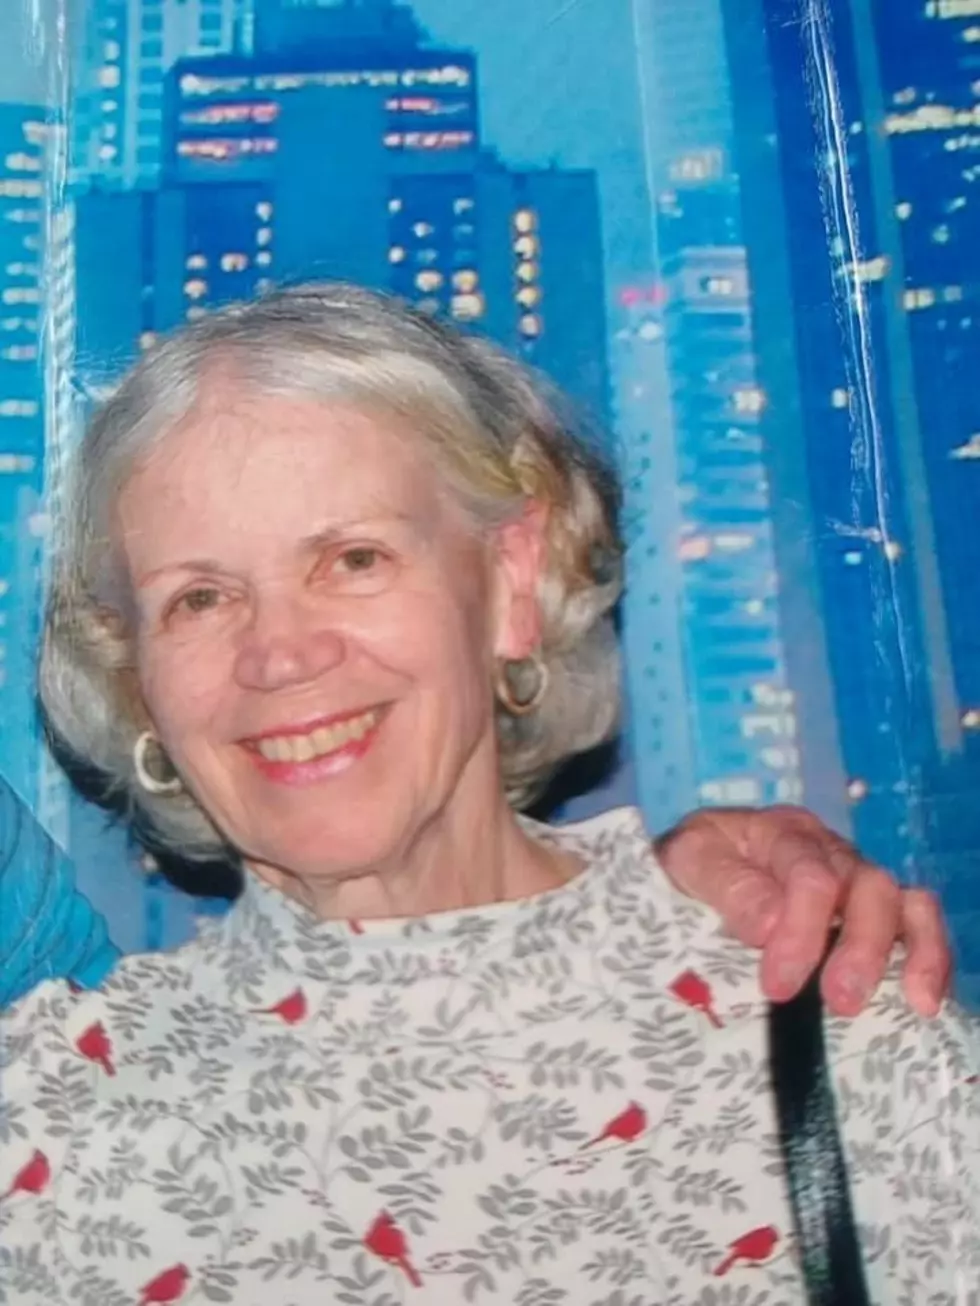 Toms River woman with Dementia reported missing